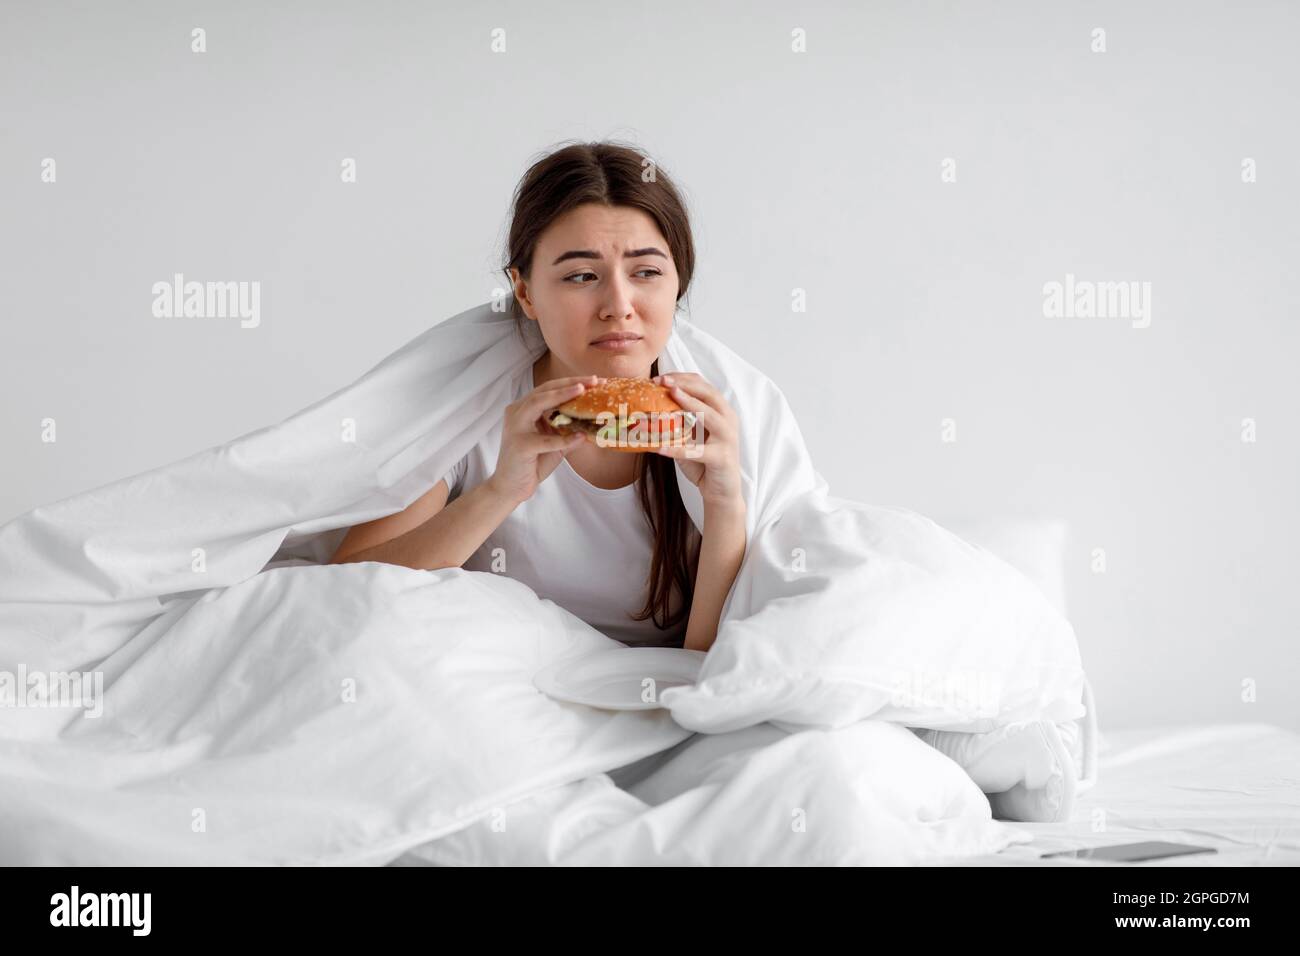 Sad upset depressed european millennial woman eating burger in bed under duvet at home alone Stock Photo